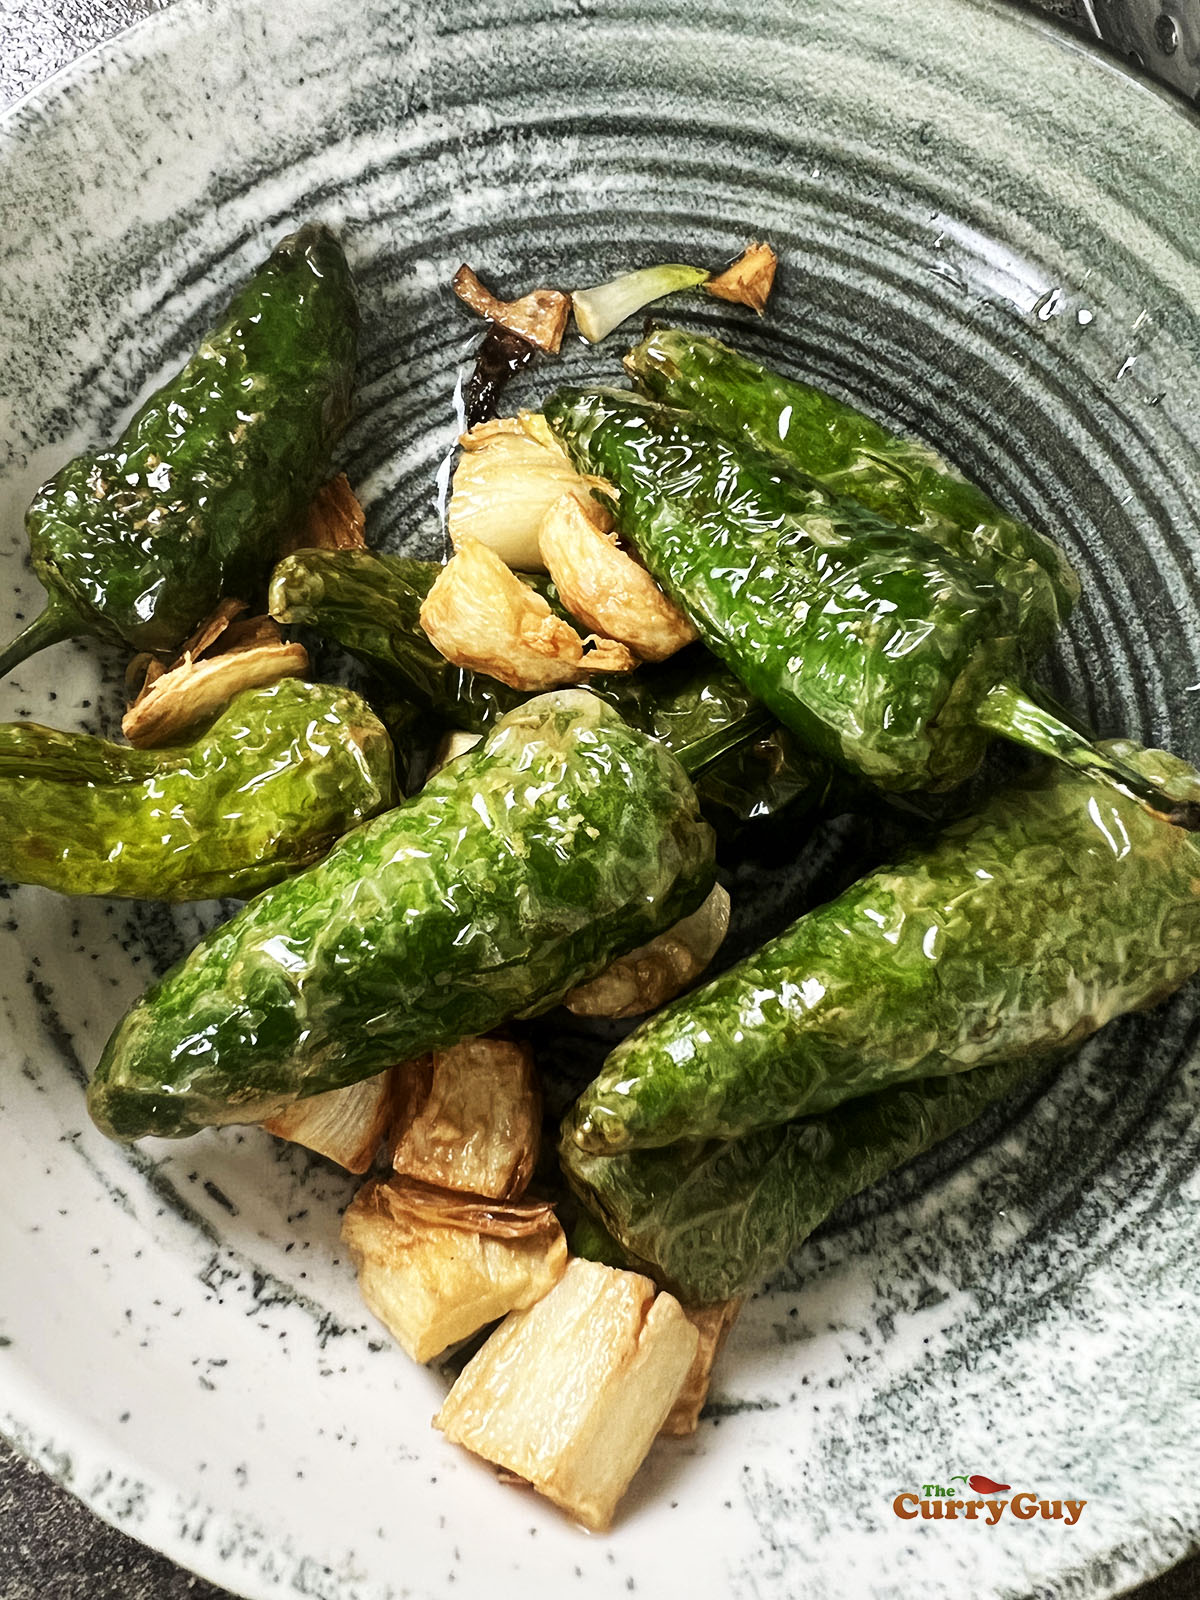 Fried chillies and garlic